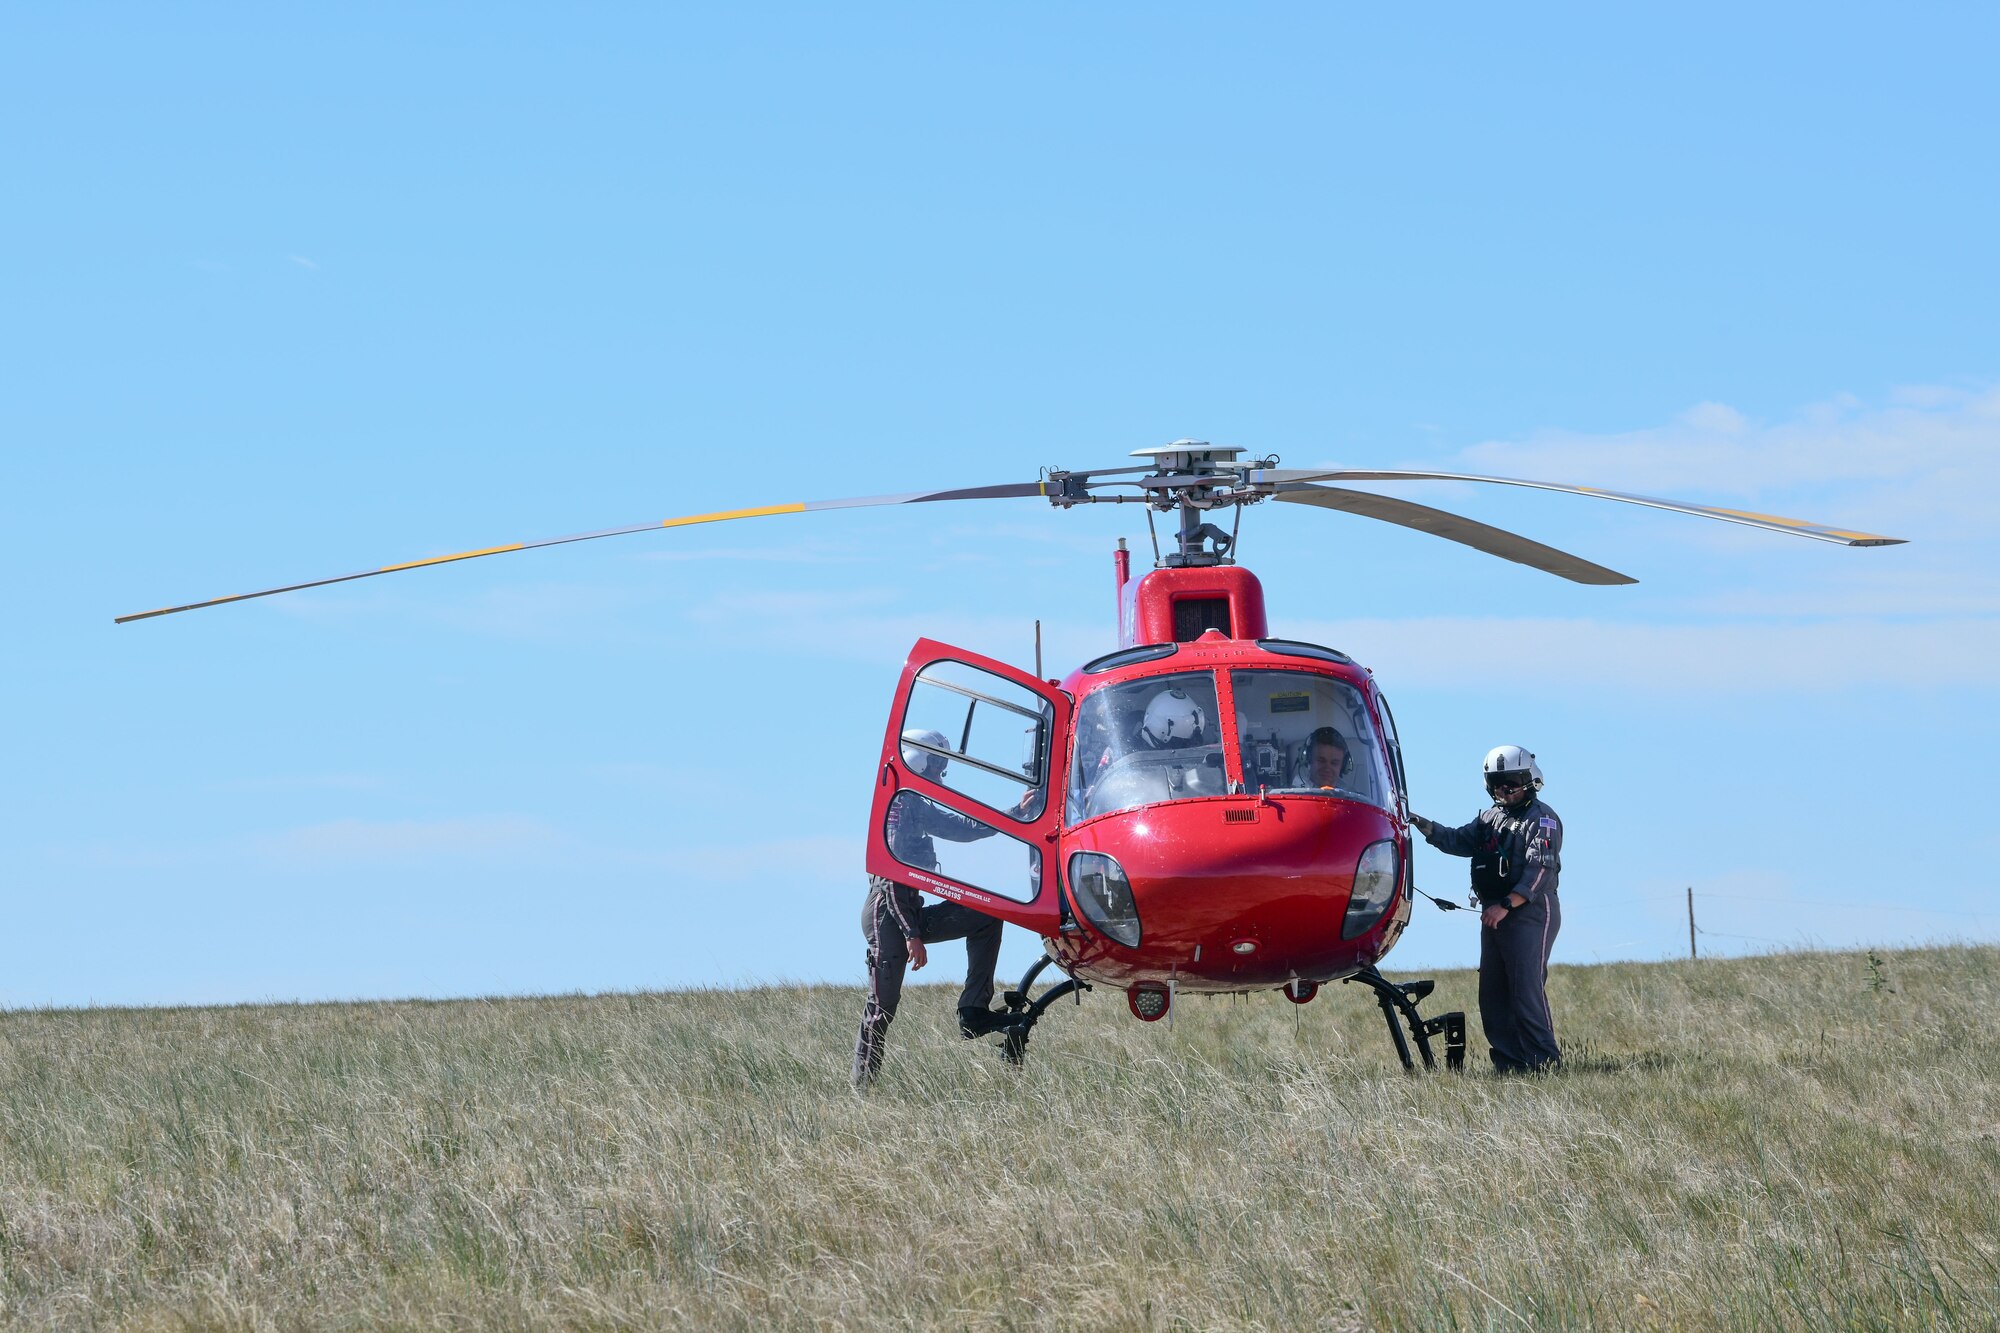 The UCHealth LifeLine medivac helps the 90th Missile Wing (90 MW) by medevacking the simulated injured people during the 2022 major accident response exercise, June 29, 2022, on F.E. Warren Air Force Base, Wyoming. Partnerships with community first responders helps the base improve emergency medical response during exercises and real-world events. (U.S. Air Force photo by Airman 1st Class Sarah Post)